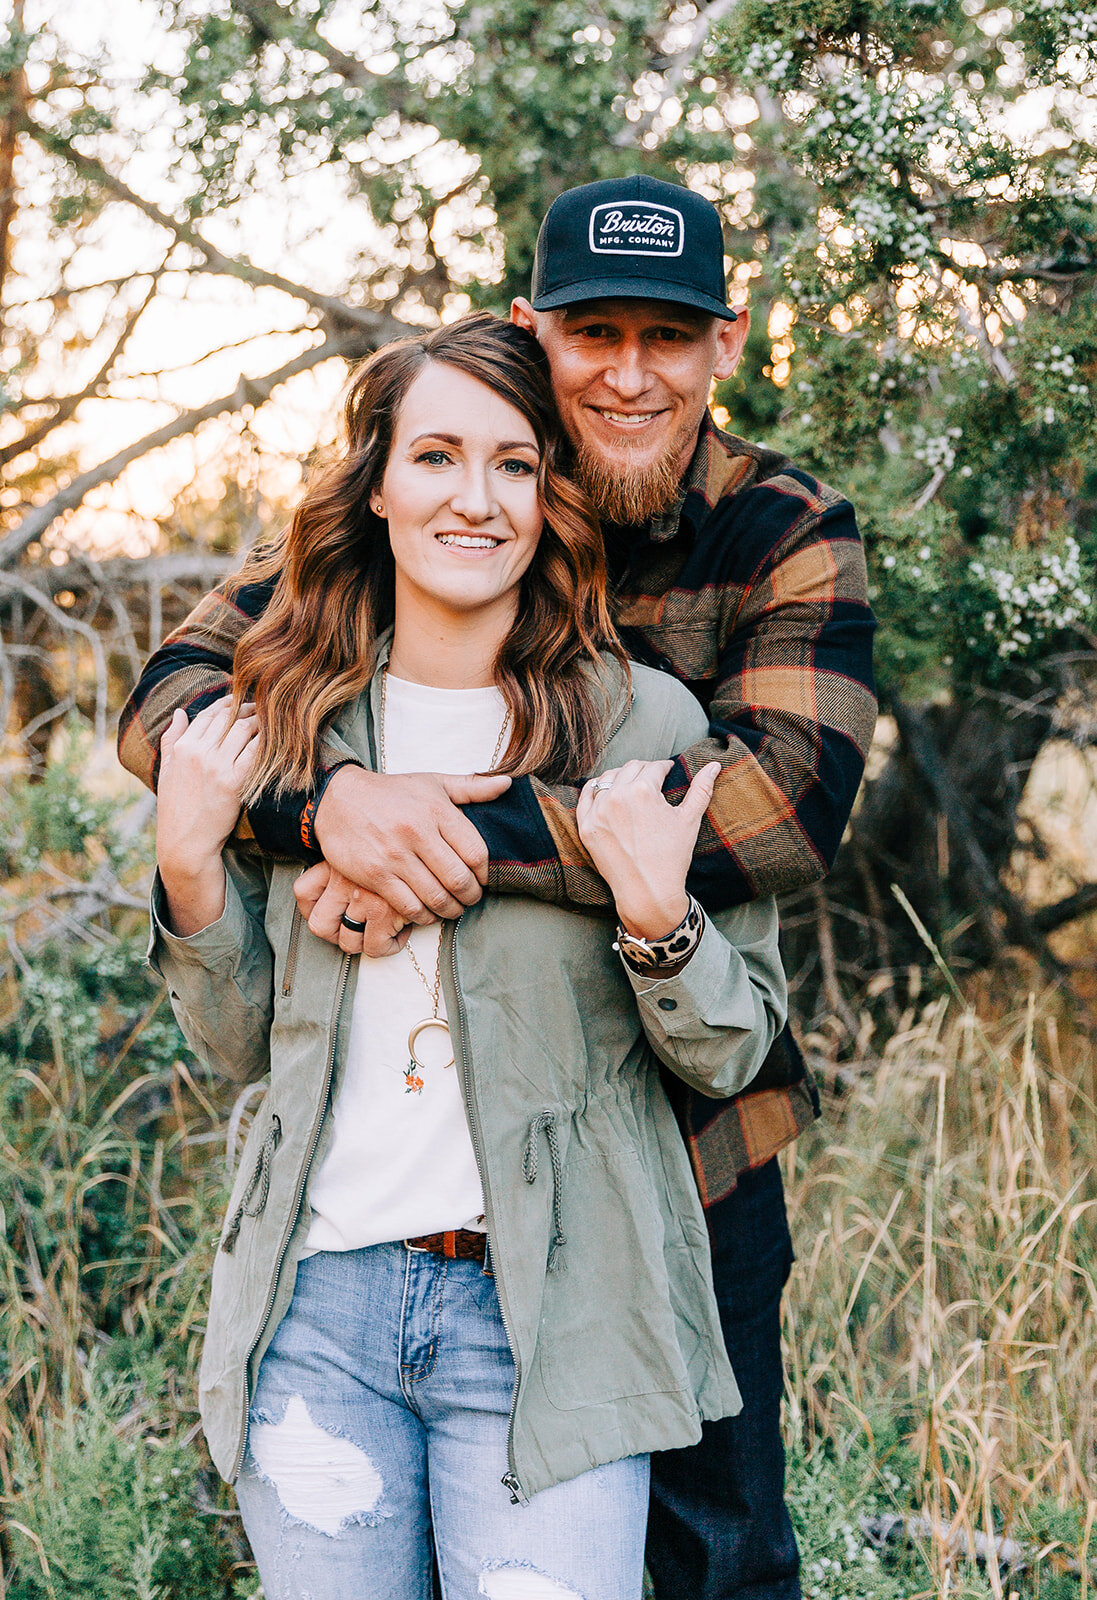  couple engagements outfit inspiration fall family photos pretty models northern utah fashion photography for online clothing boutique new storefront in tremonton utah the classic shop commercial photography by bella alder photography in logan utah g